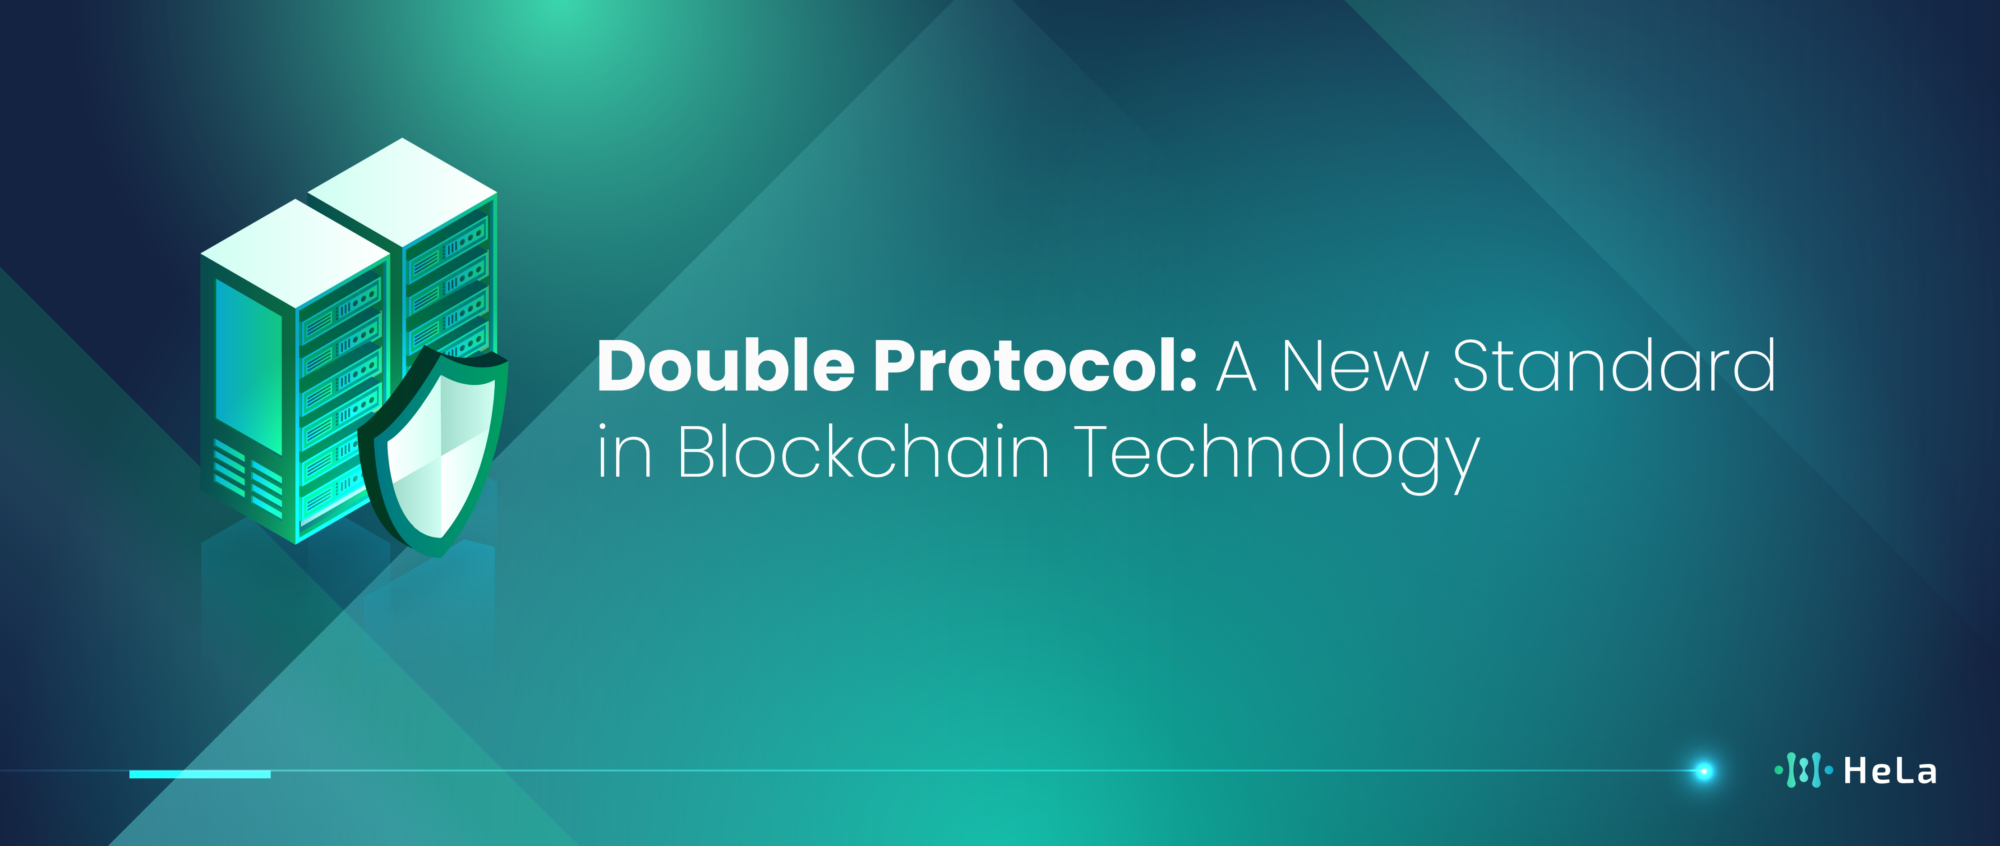 Double Protocol: A New Standard in Blockchain Technology